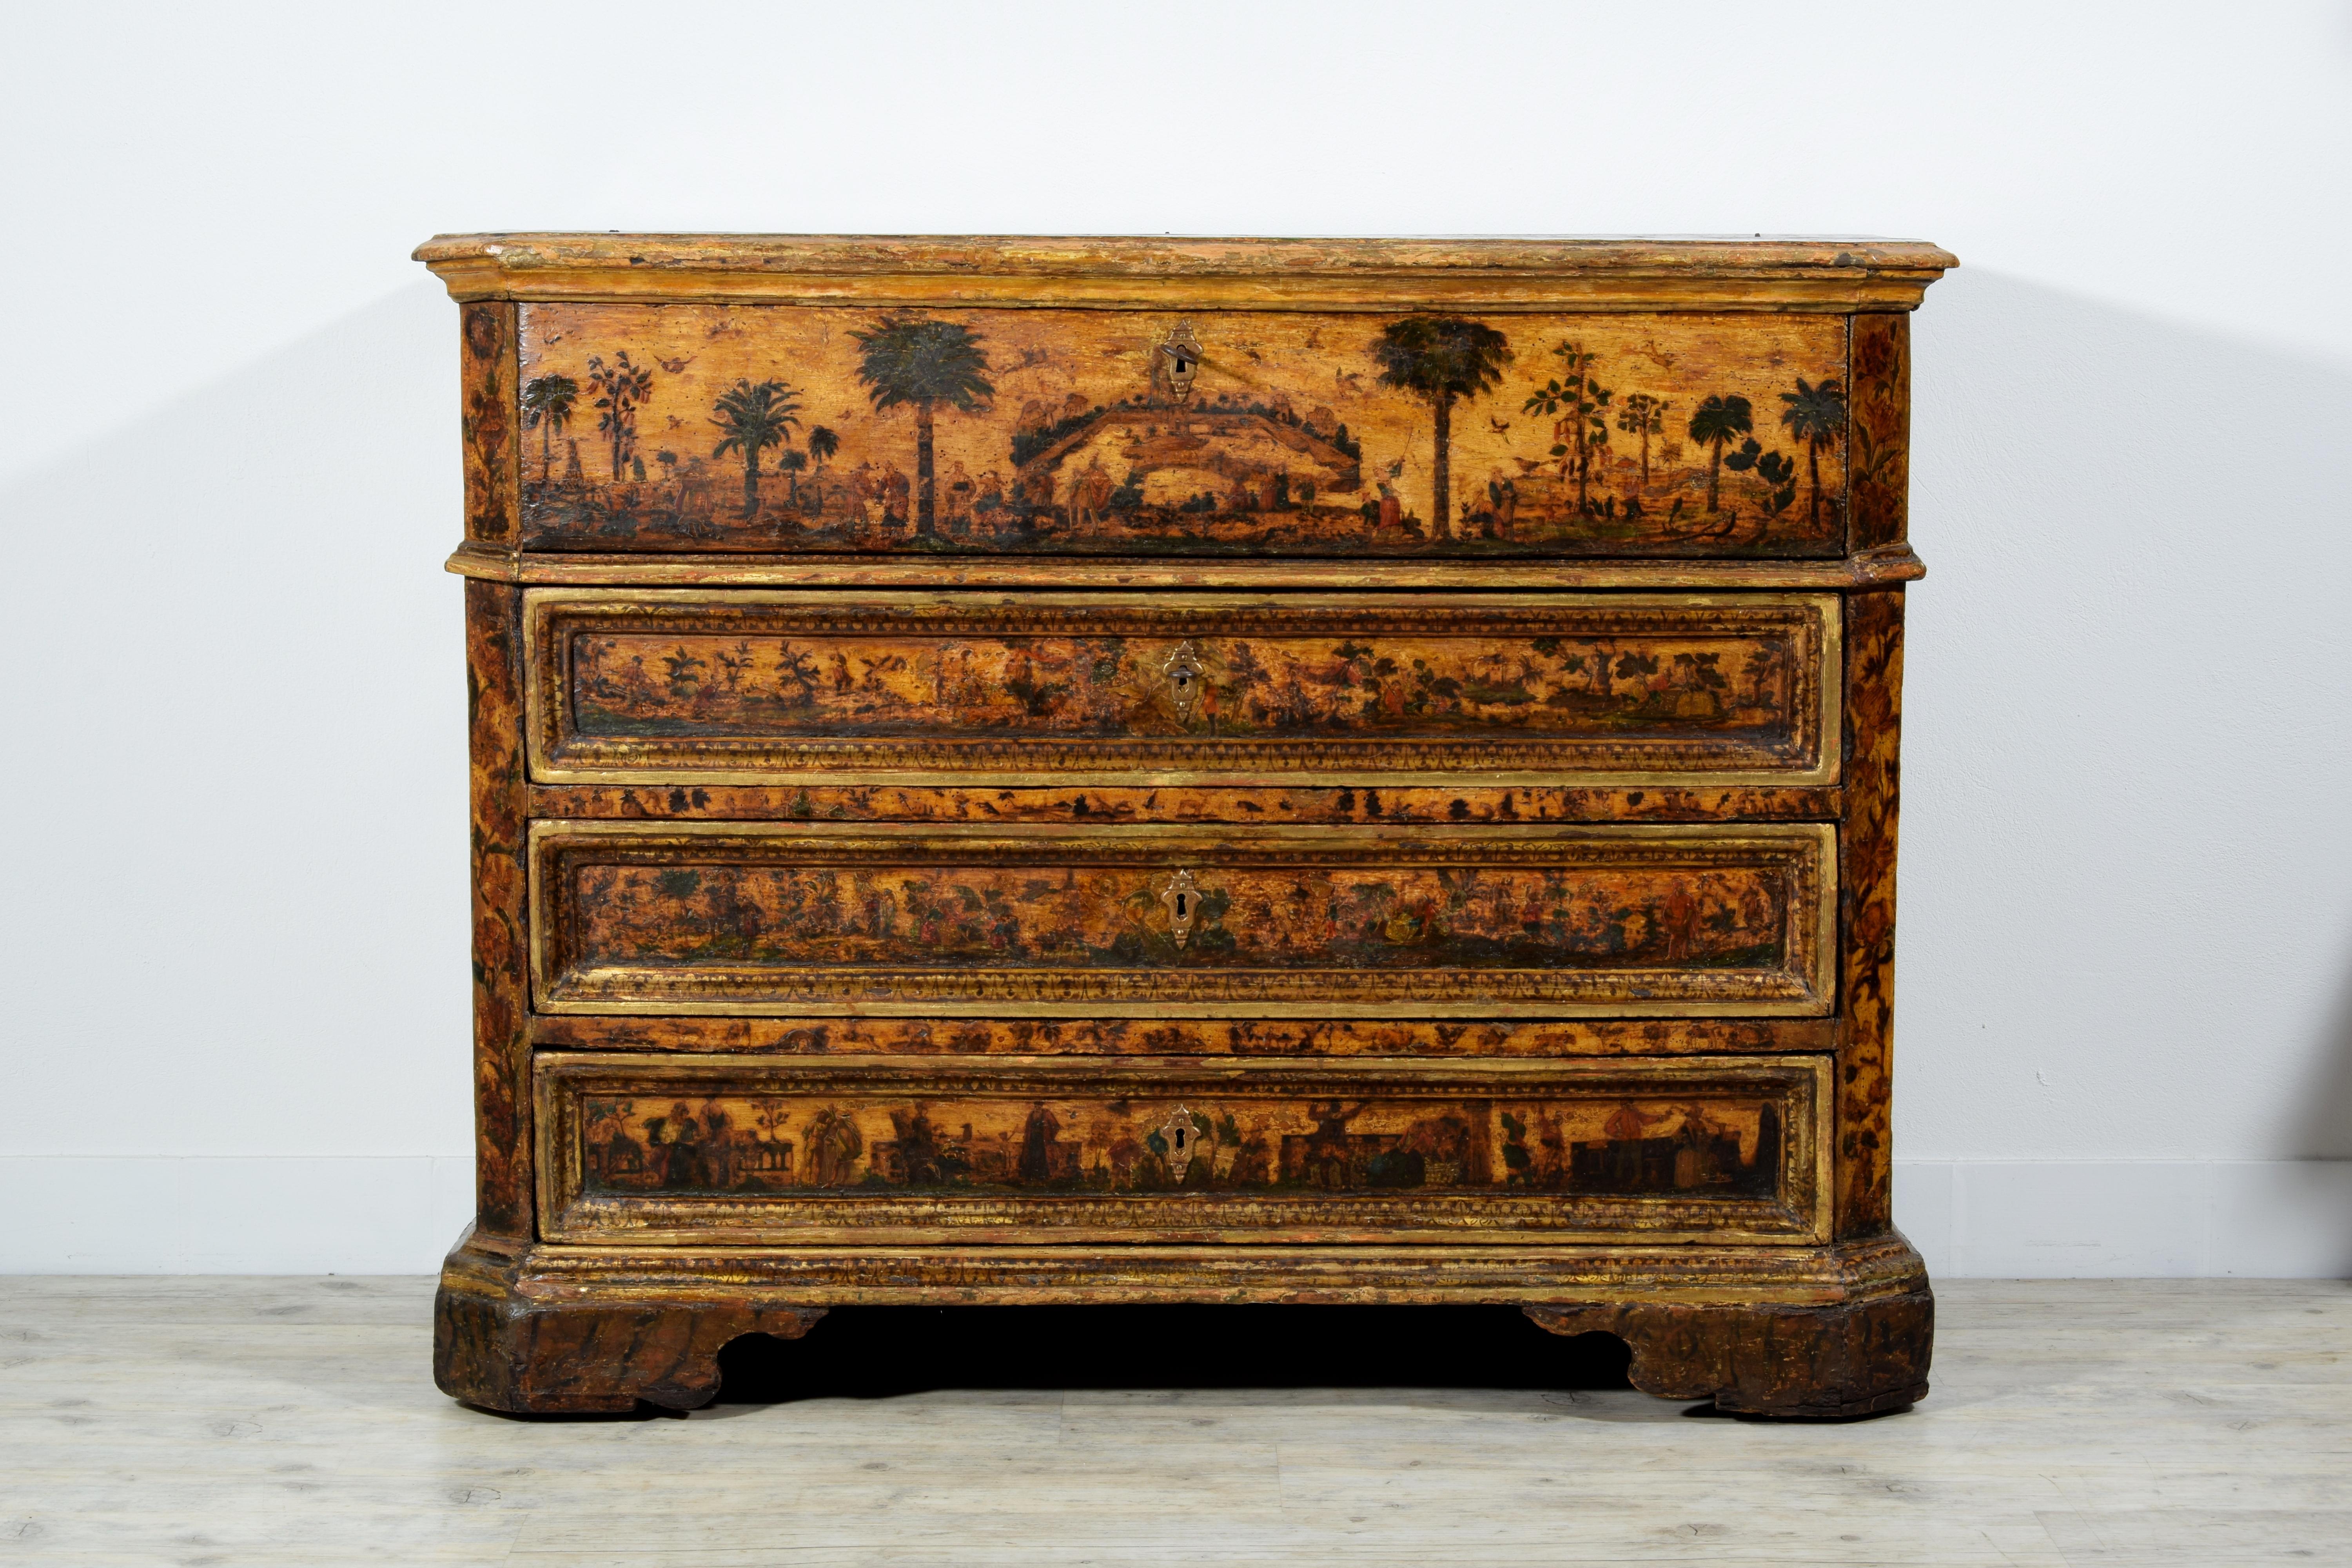 18th century, Italian baroque lacquered wood chest of drawers

This rare and particular baroque chest of drawers was made around the beginning of the eighteenth century in Italy. Its wooden structure is entirely lacquered and decorated with mixed